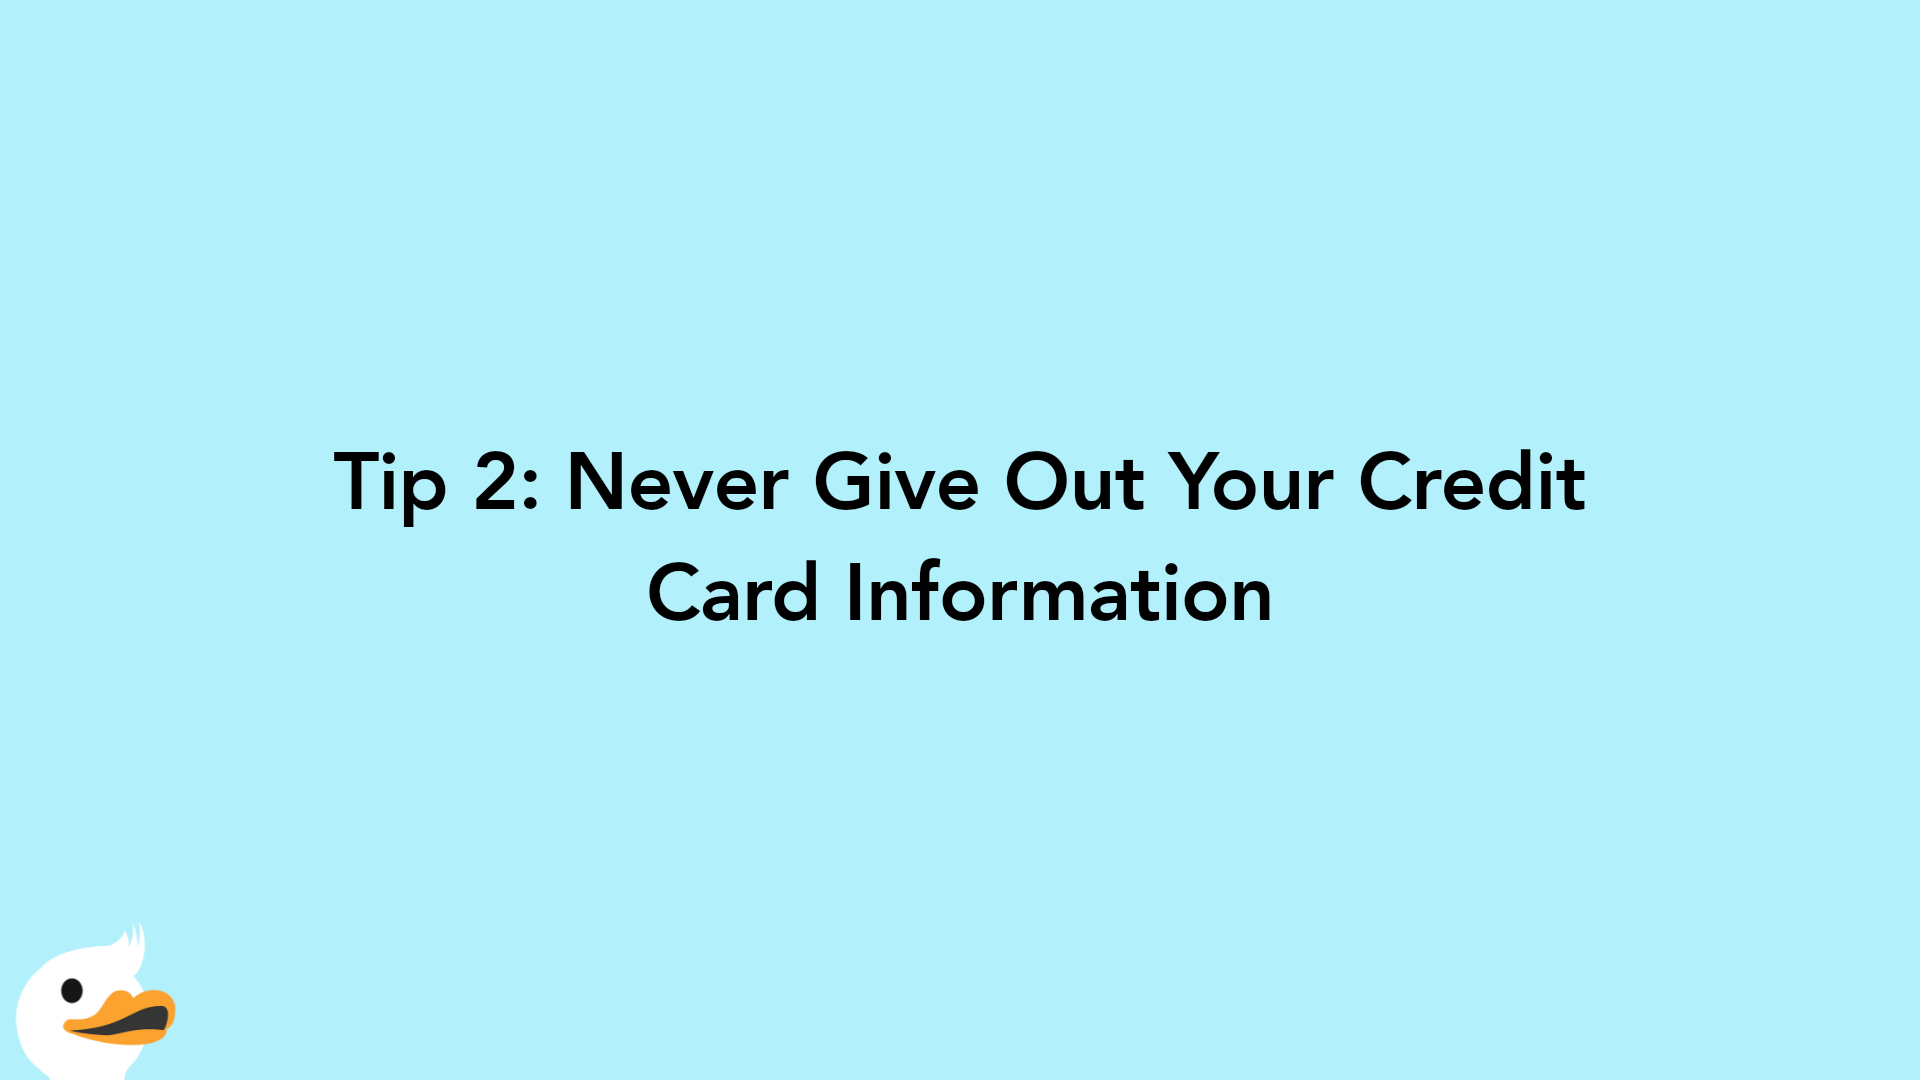 Tip 2: Never Give Out Your Credit Card Information